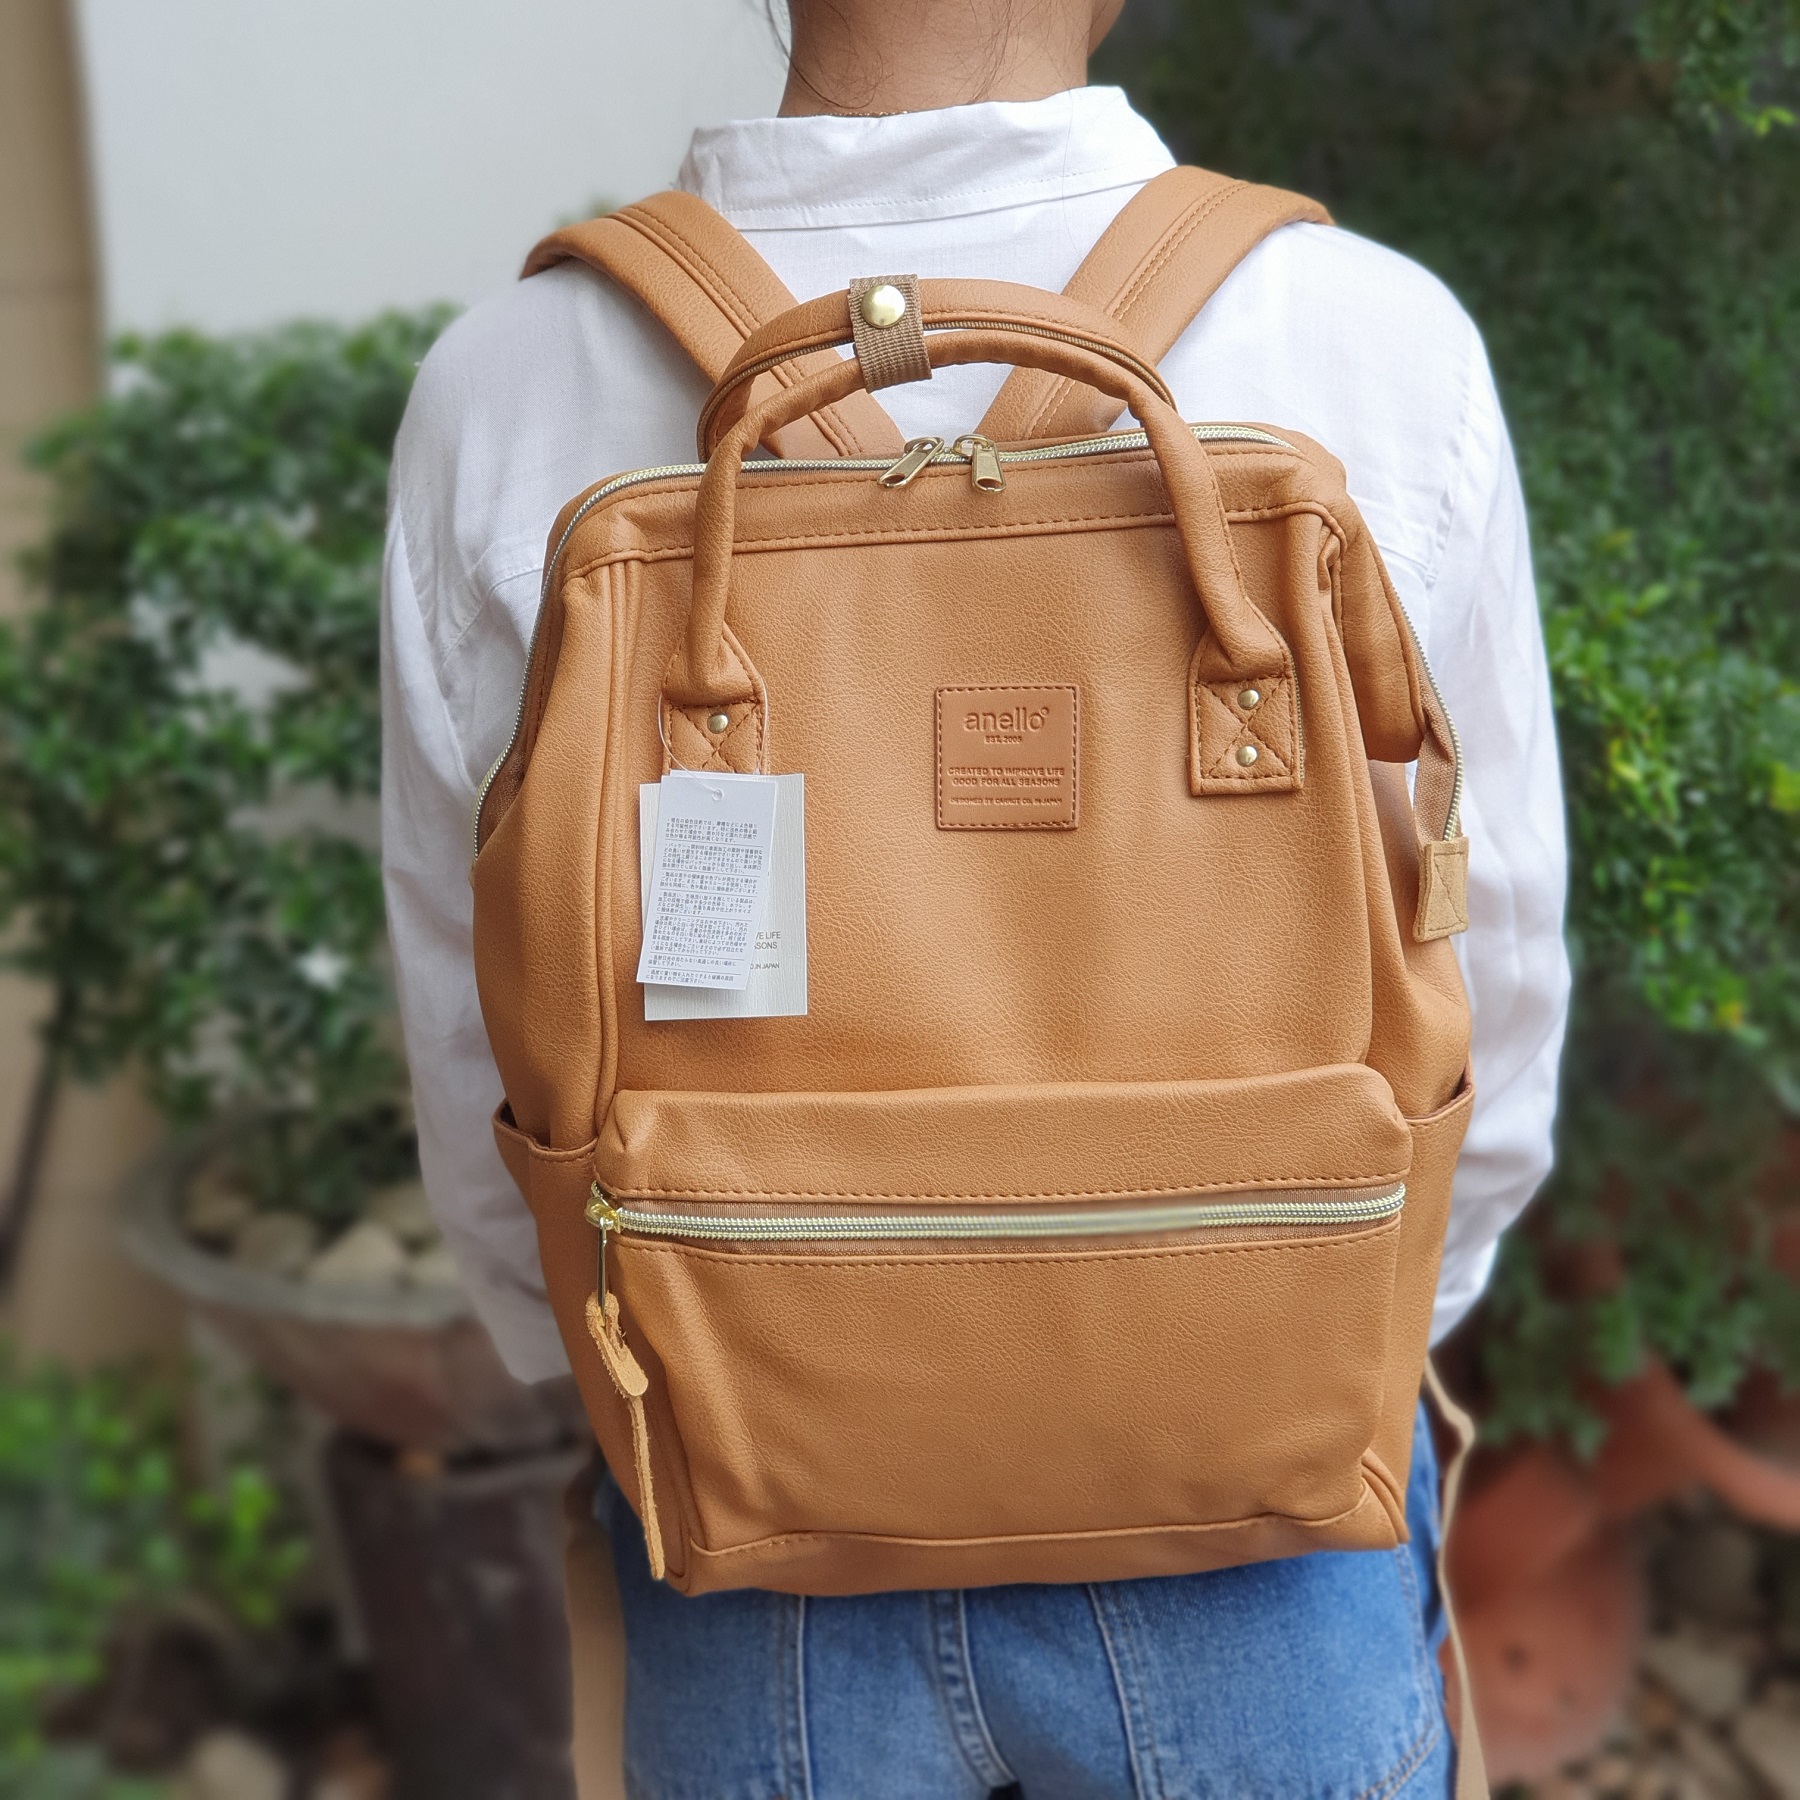 72 Confortable Anello bag warranty for Christmas Day